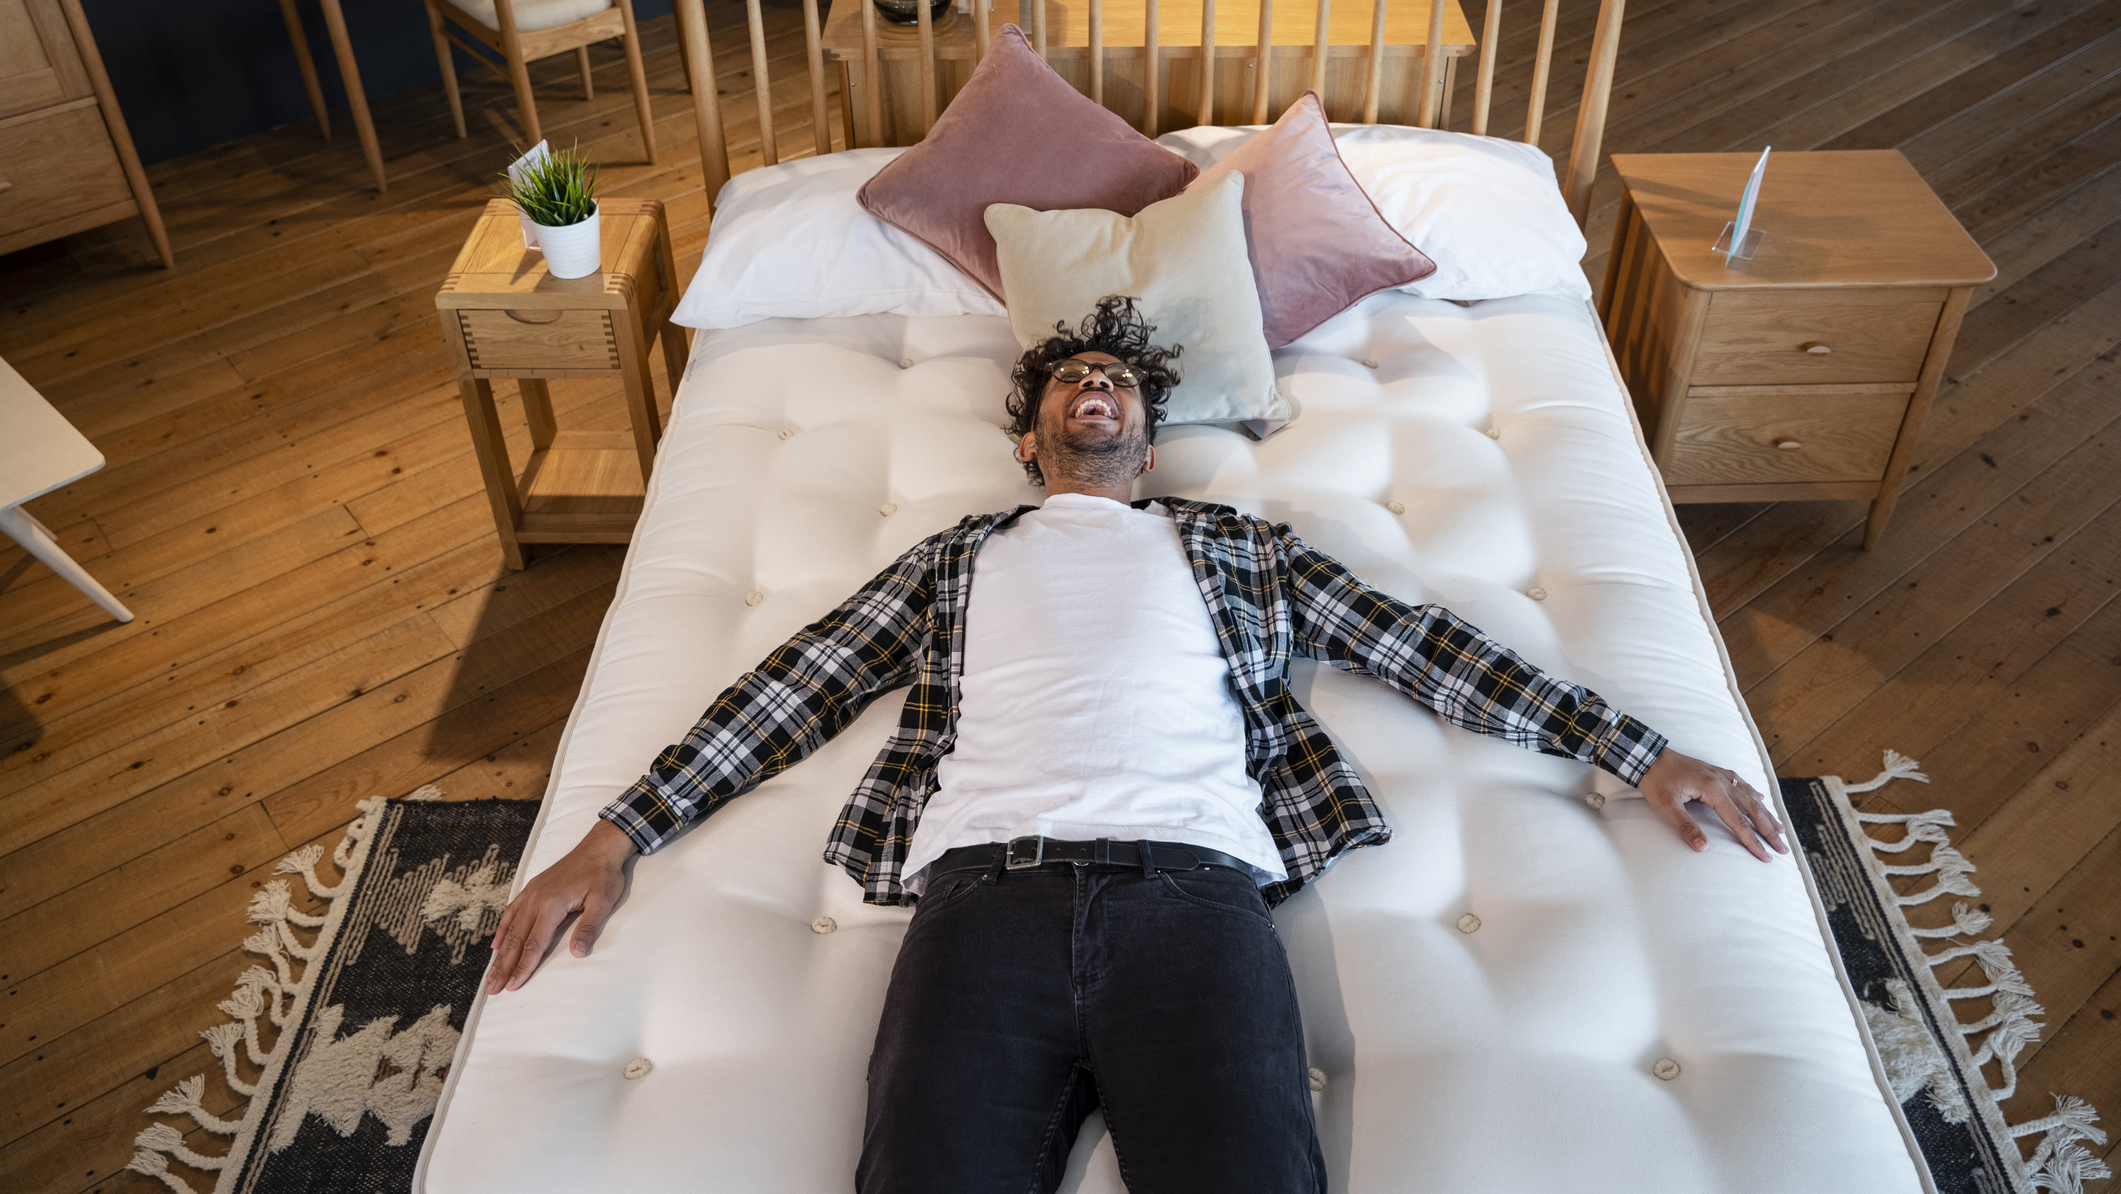 Man lying on a comfortable white mattress on a support box spring